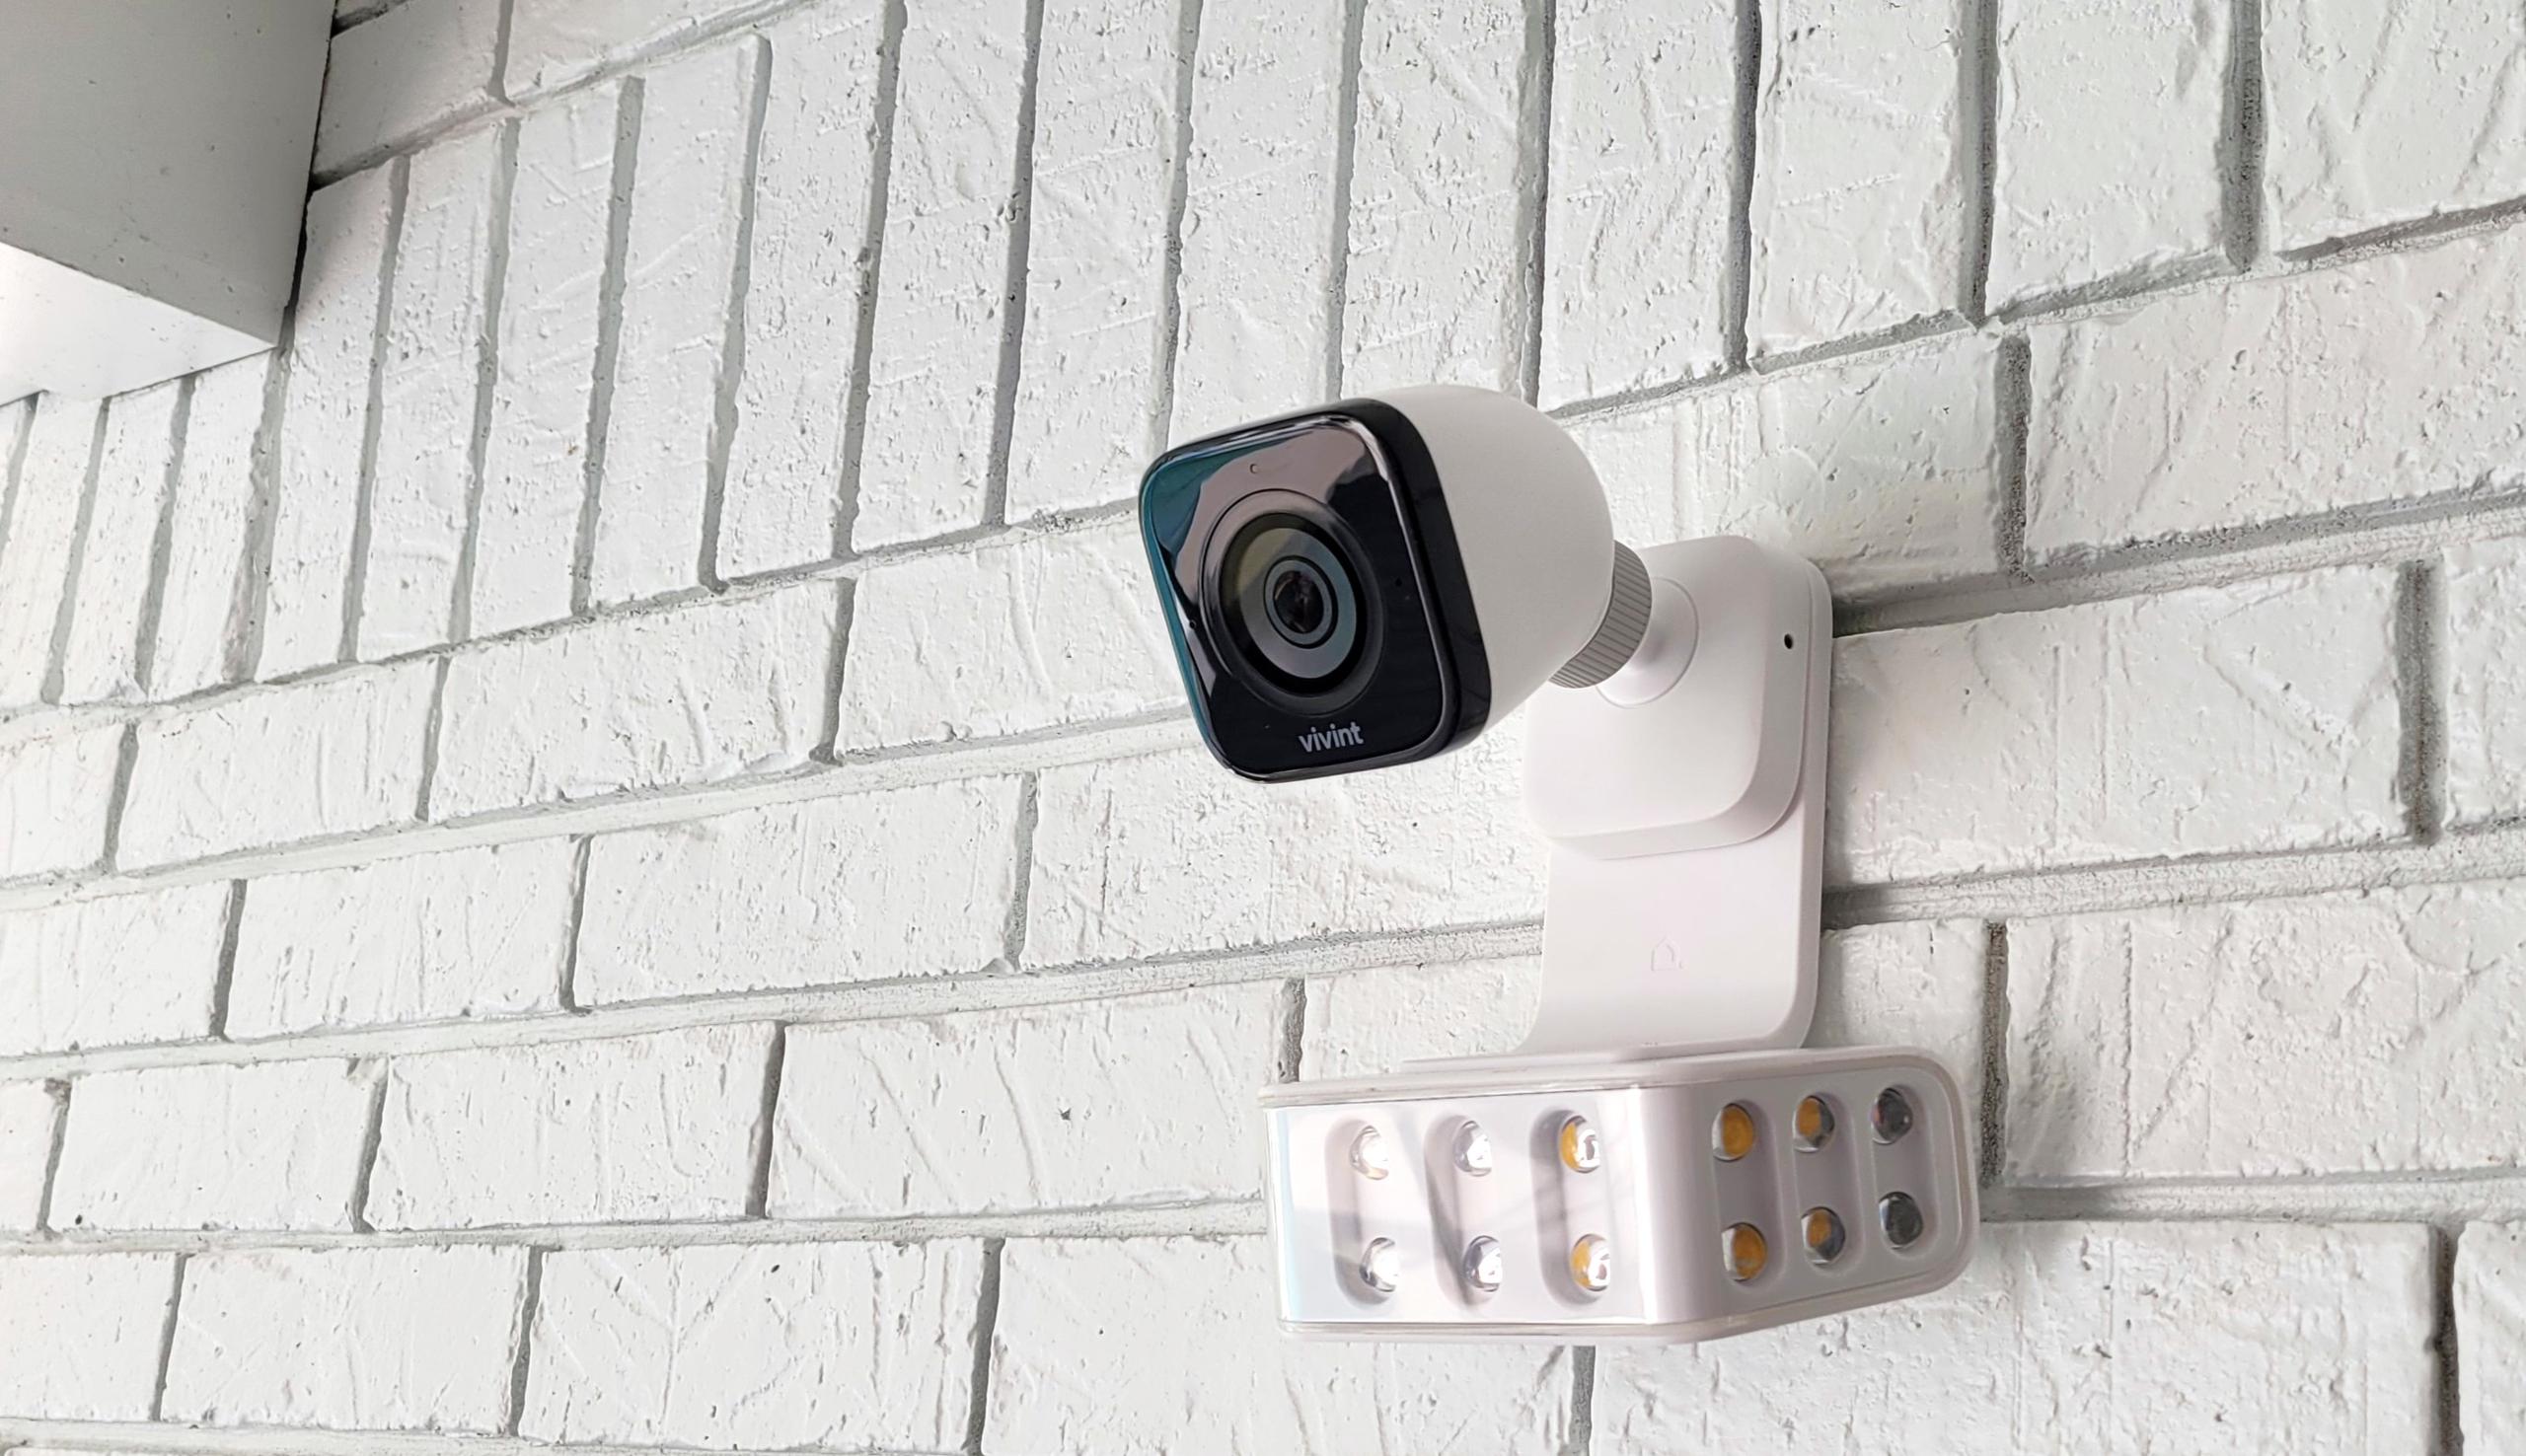 Vivint's smart home features make it a worthwhile security system for big budgets. adt home security f0623e51 vivint camera